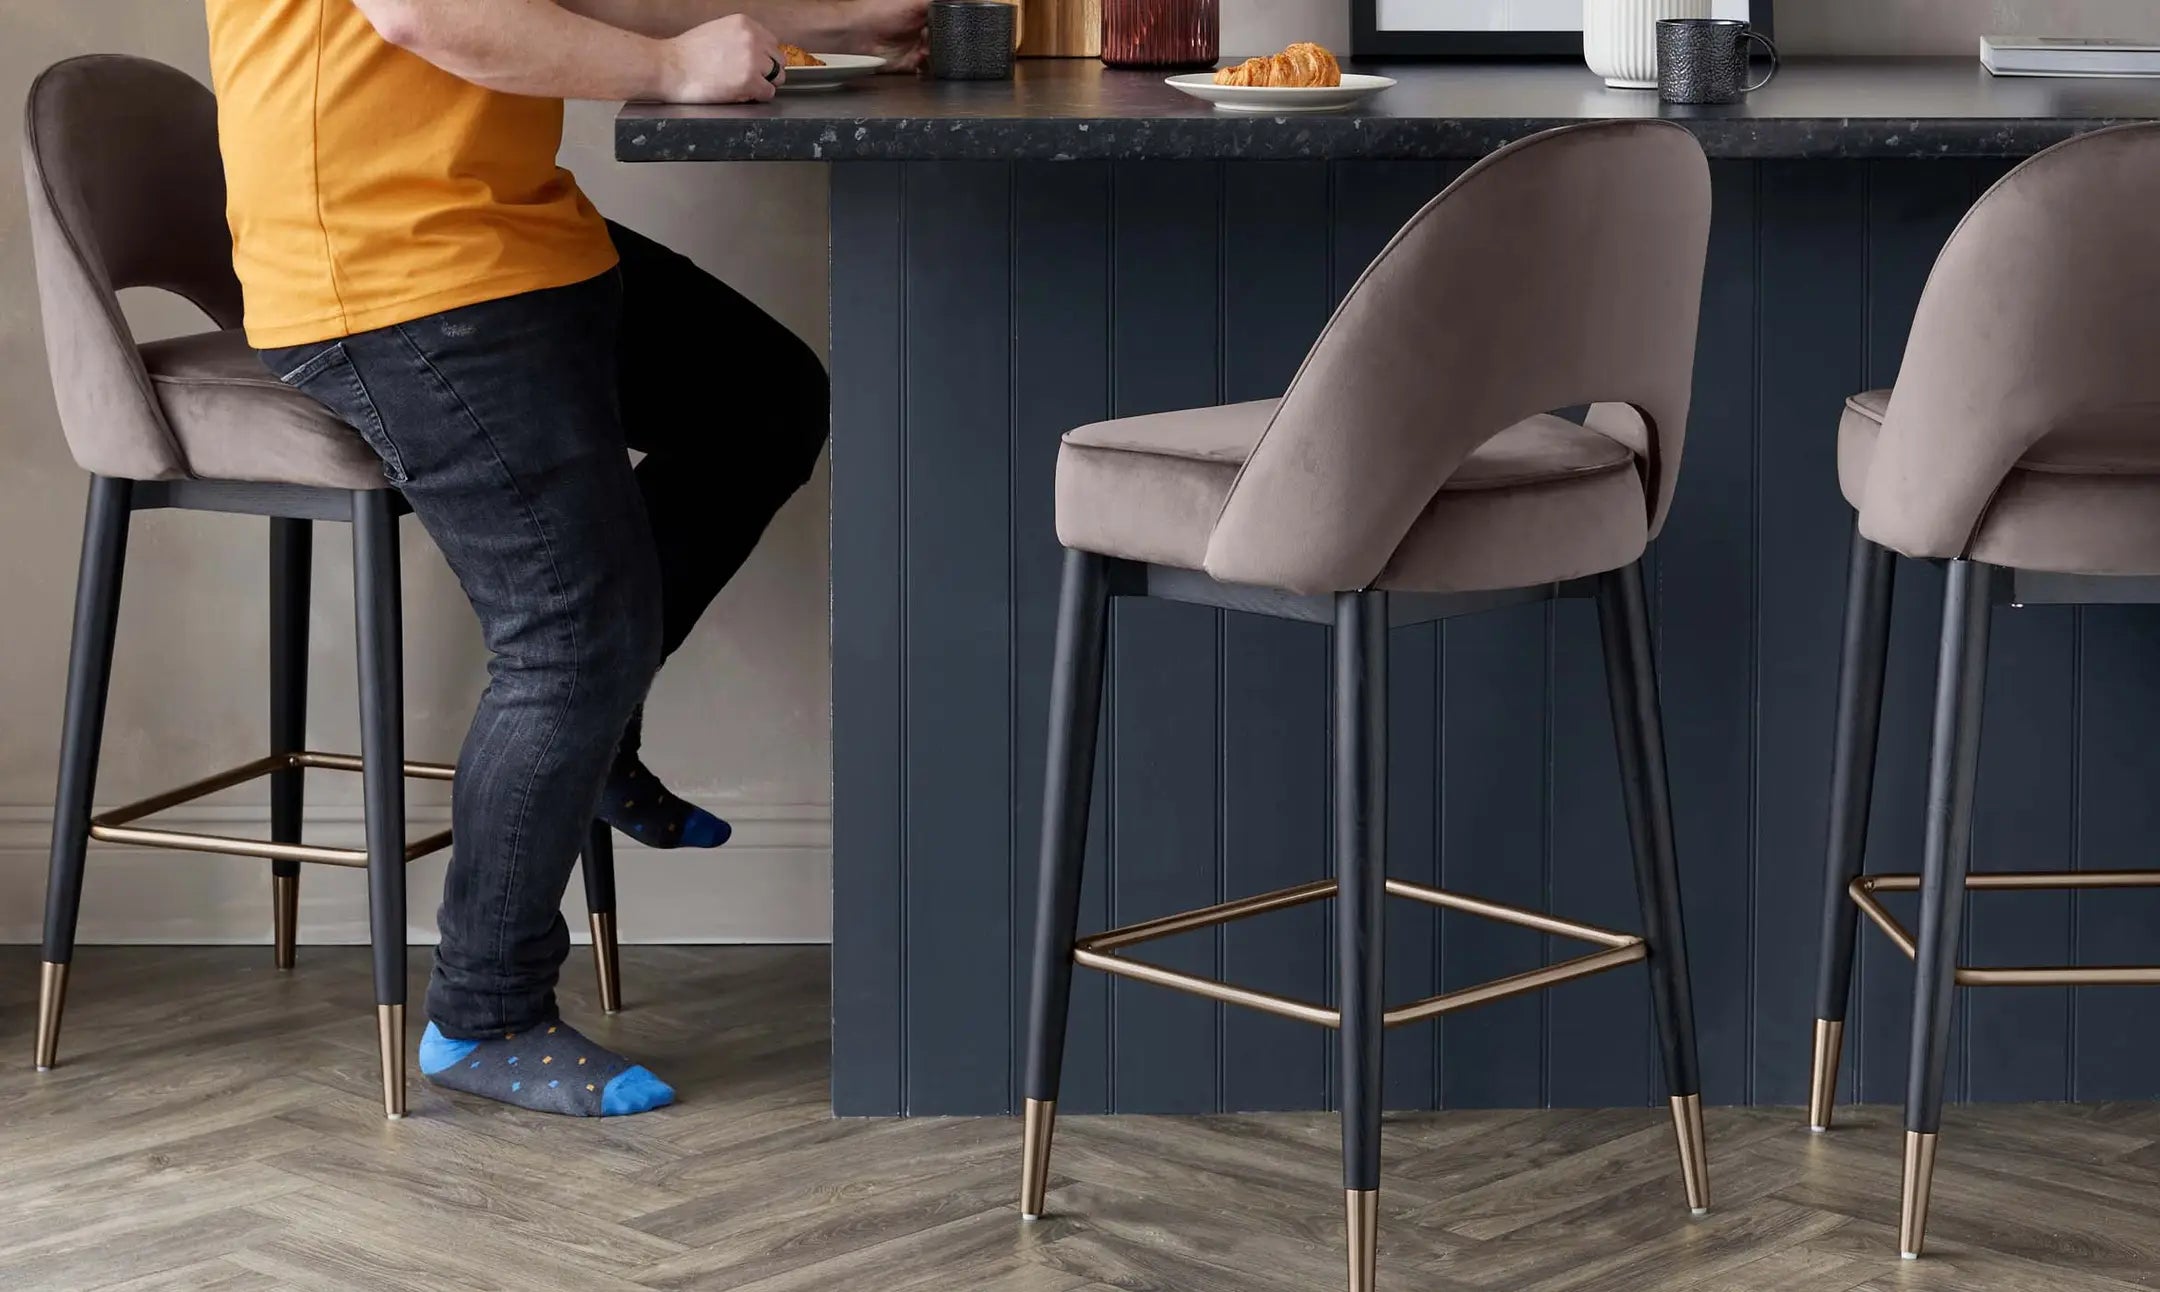 Bar stools are perfect for our busy homes